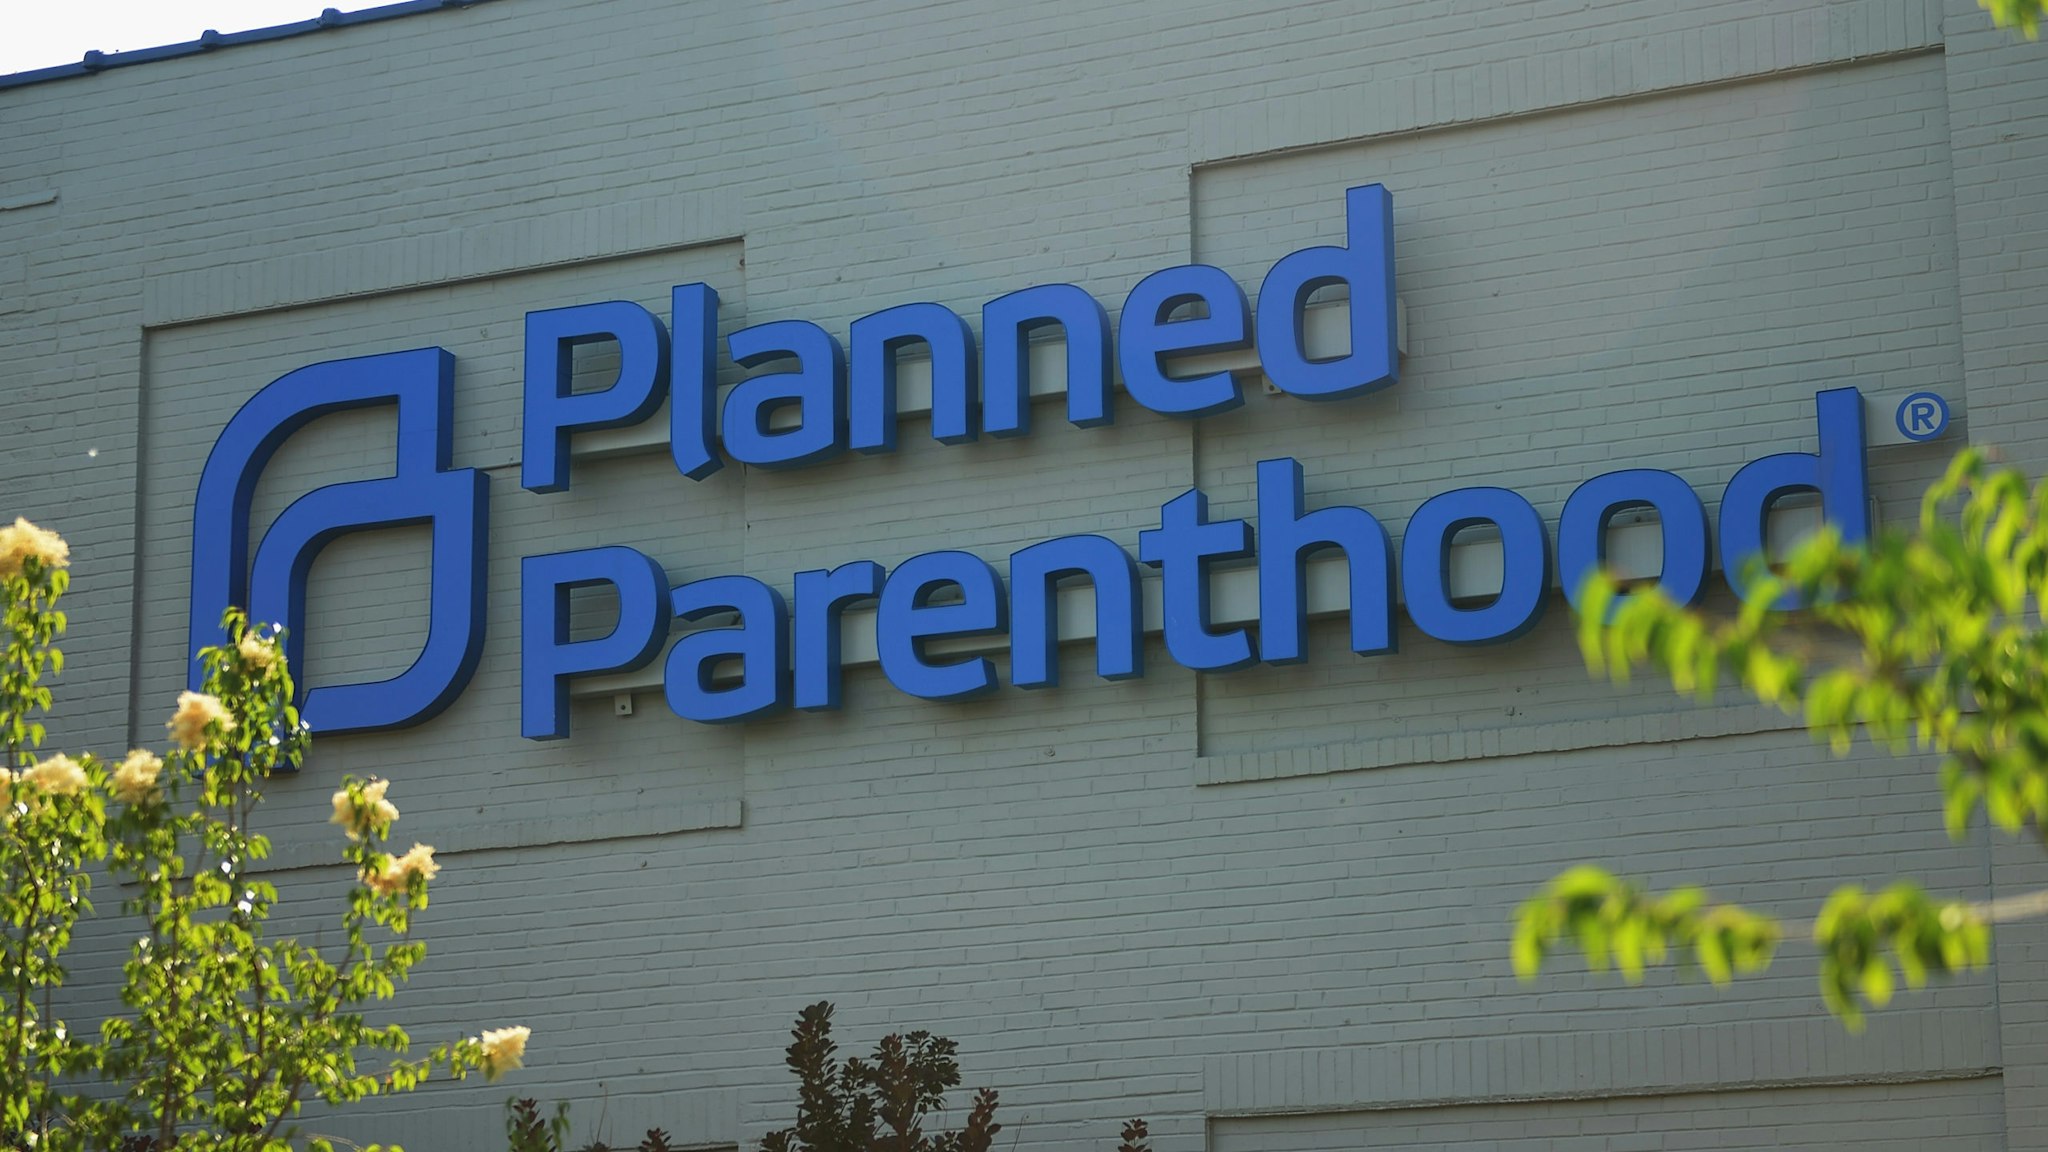 T LOUIS, MO - MAY 31: The exterior of a Planned Parenthood Reproductive Health Services Center is seen on May 31, 2019 in St Louis, Missouri. In the wake of Missouri recent controversial abortion legislation, the states' last abortion clinic is being forced to close by the end of the week. Planned Parenthood is expected to go to court to try and stop the closing. (Photo by Michael Thomas/Getty Images)